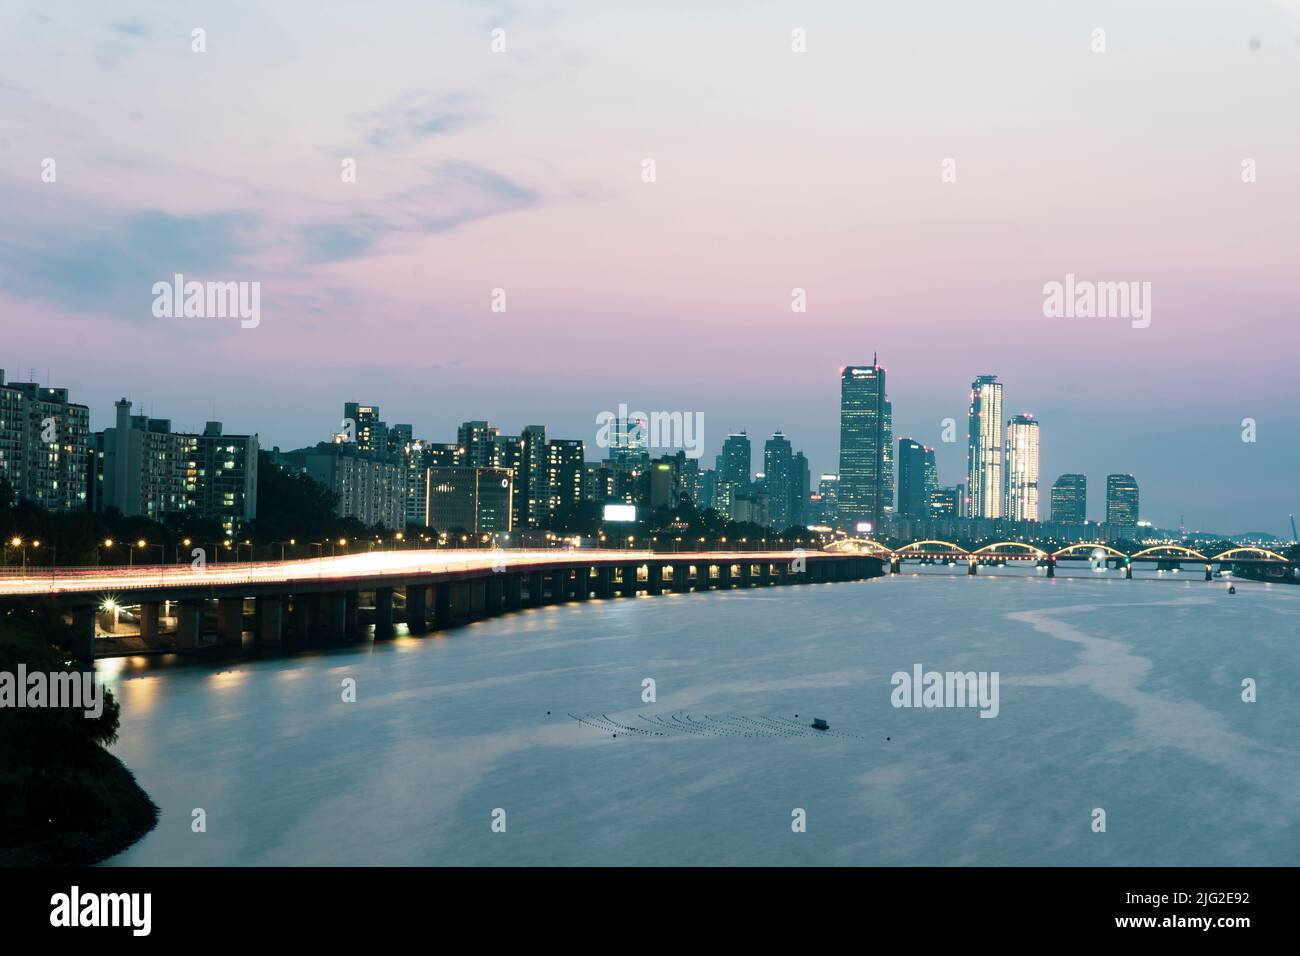 The night view of the 63 Building is beautiful. Stock Photo